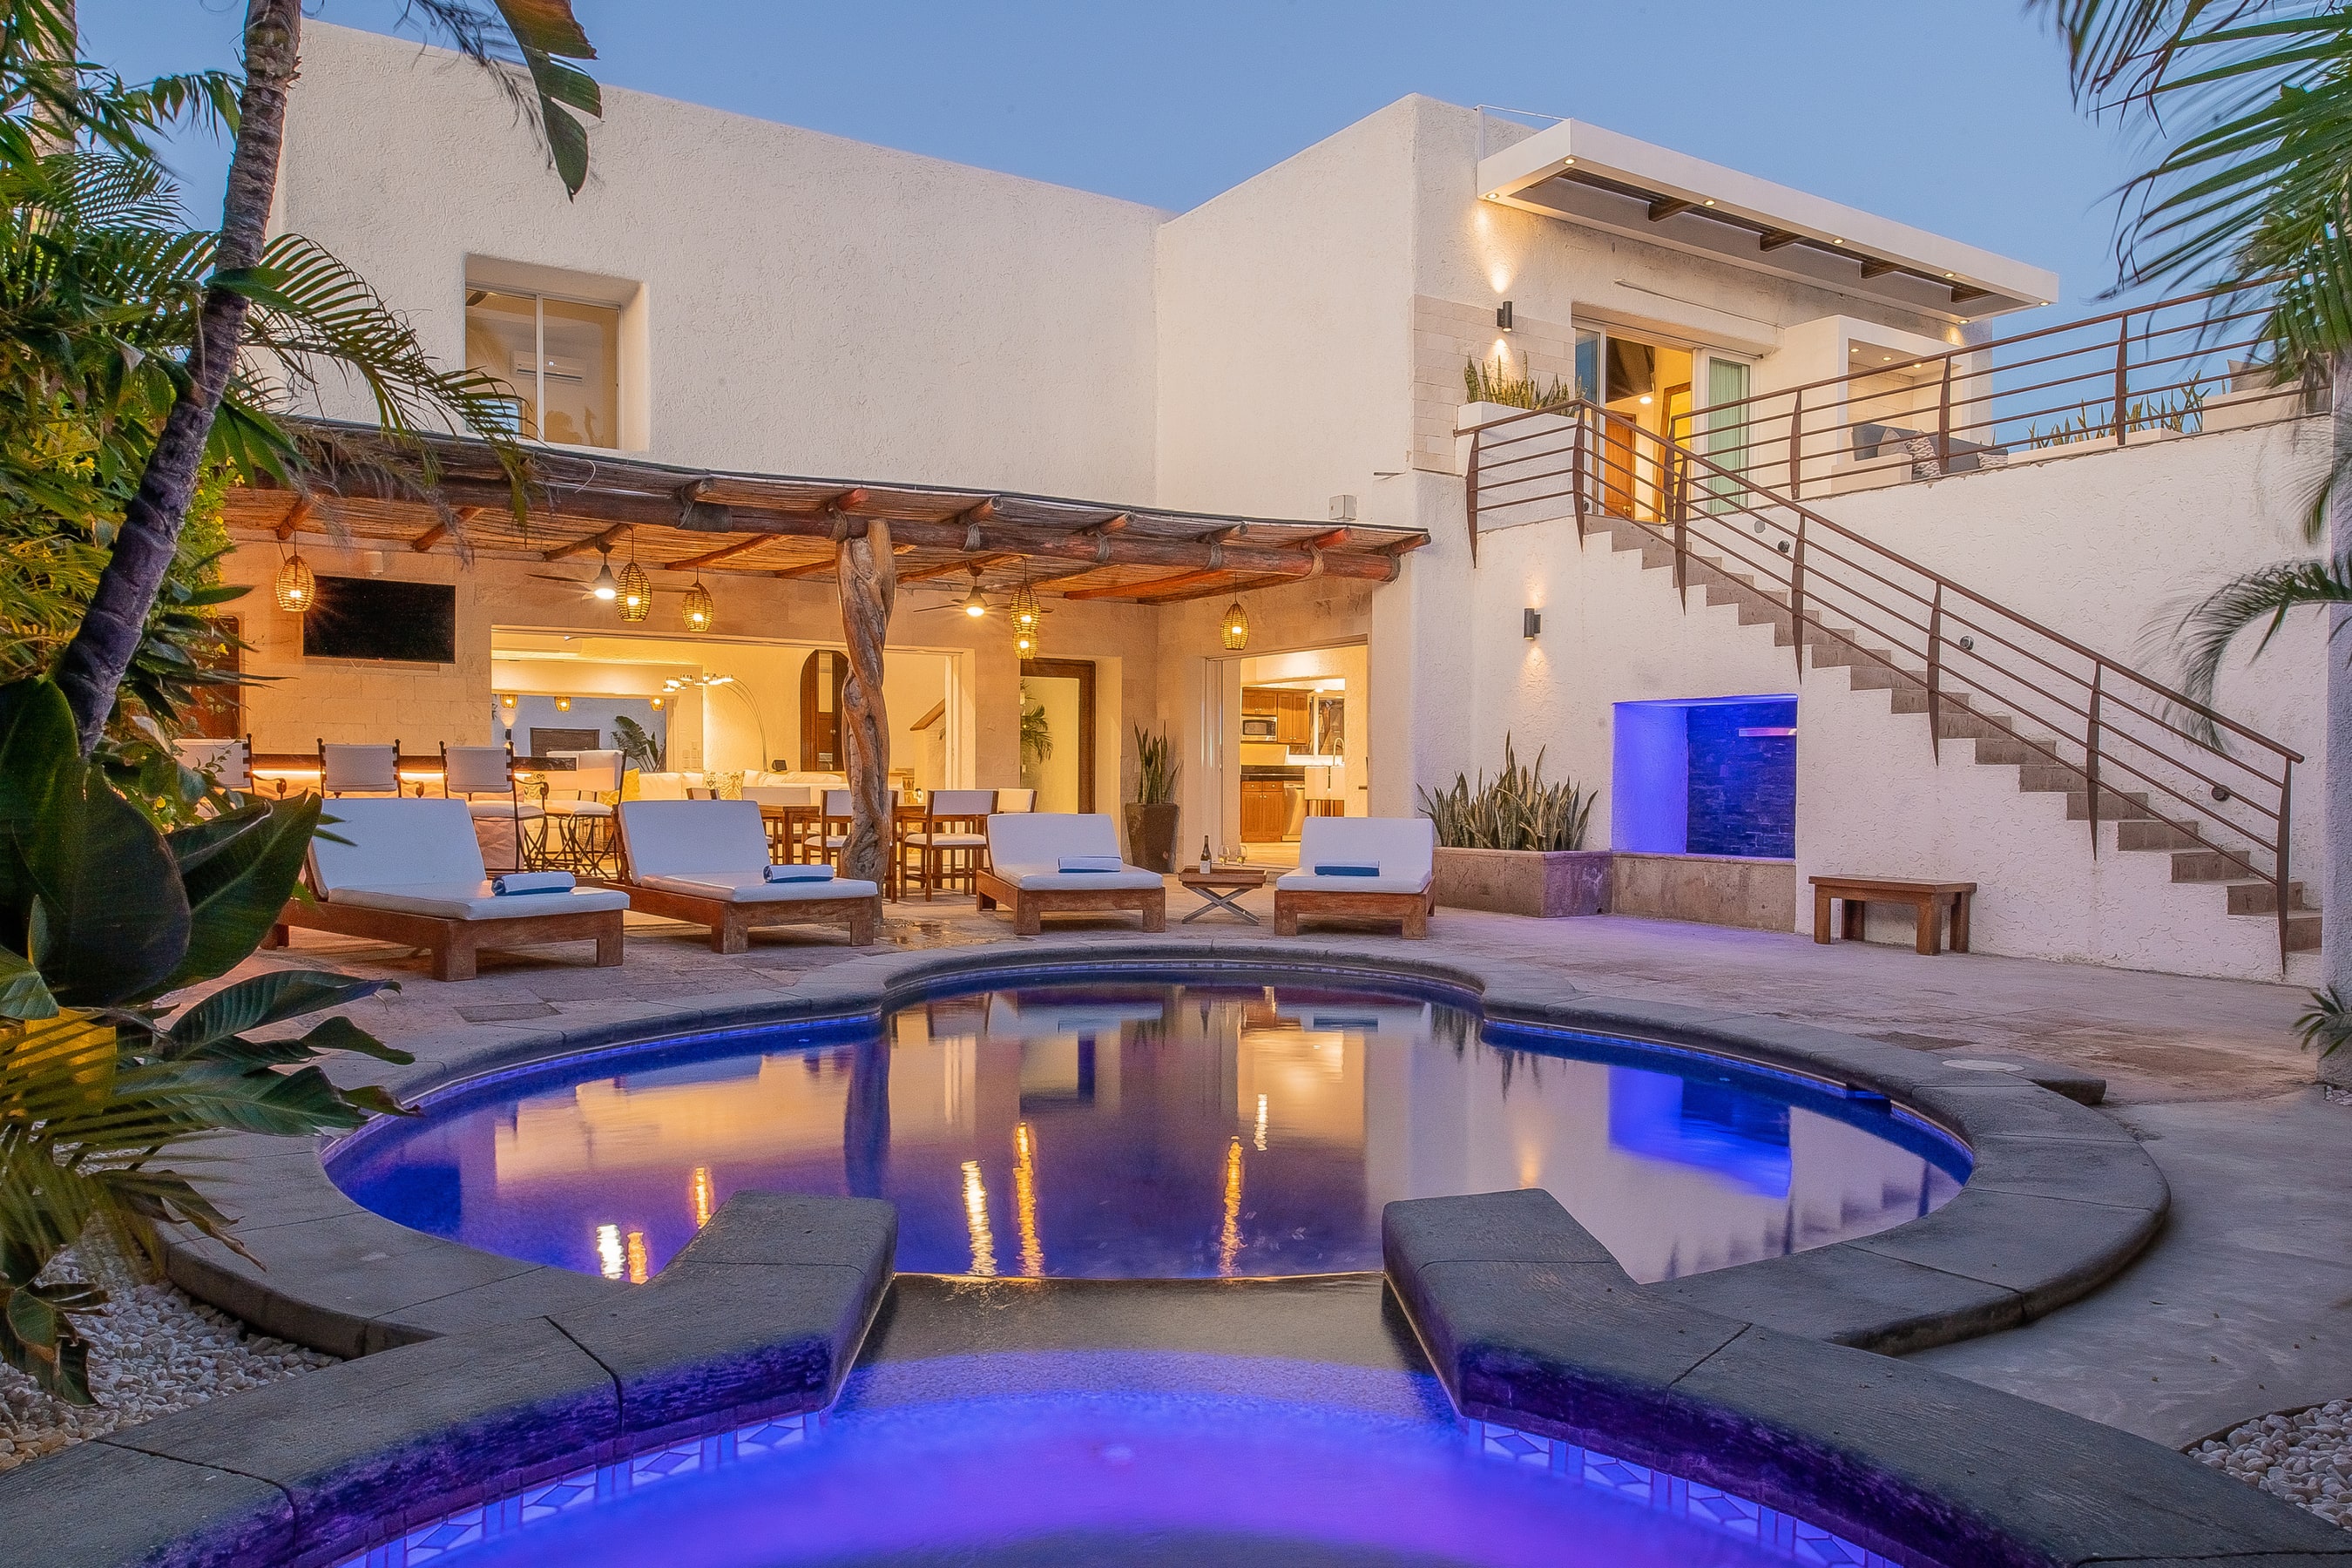 Cabo San Lucas, Mexico – “Villa Luna Nueva” is this year’s bonus property. The striking home features a tropical outdoor area, expansive patio, private pool and secluded garden terrace.